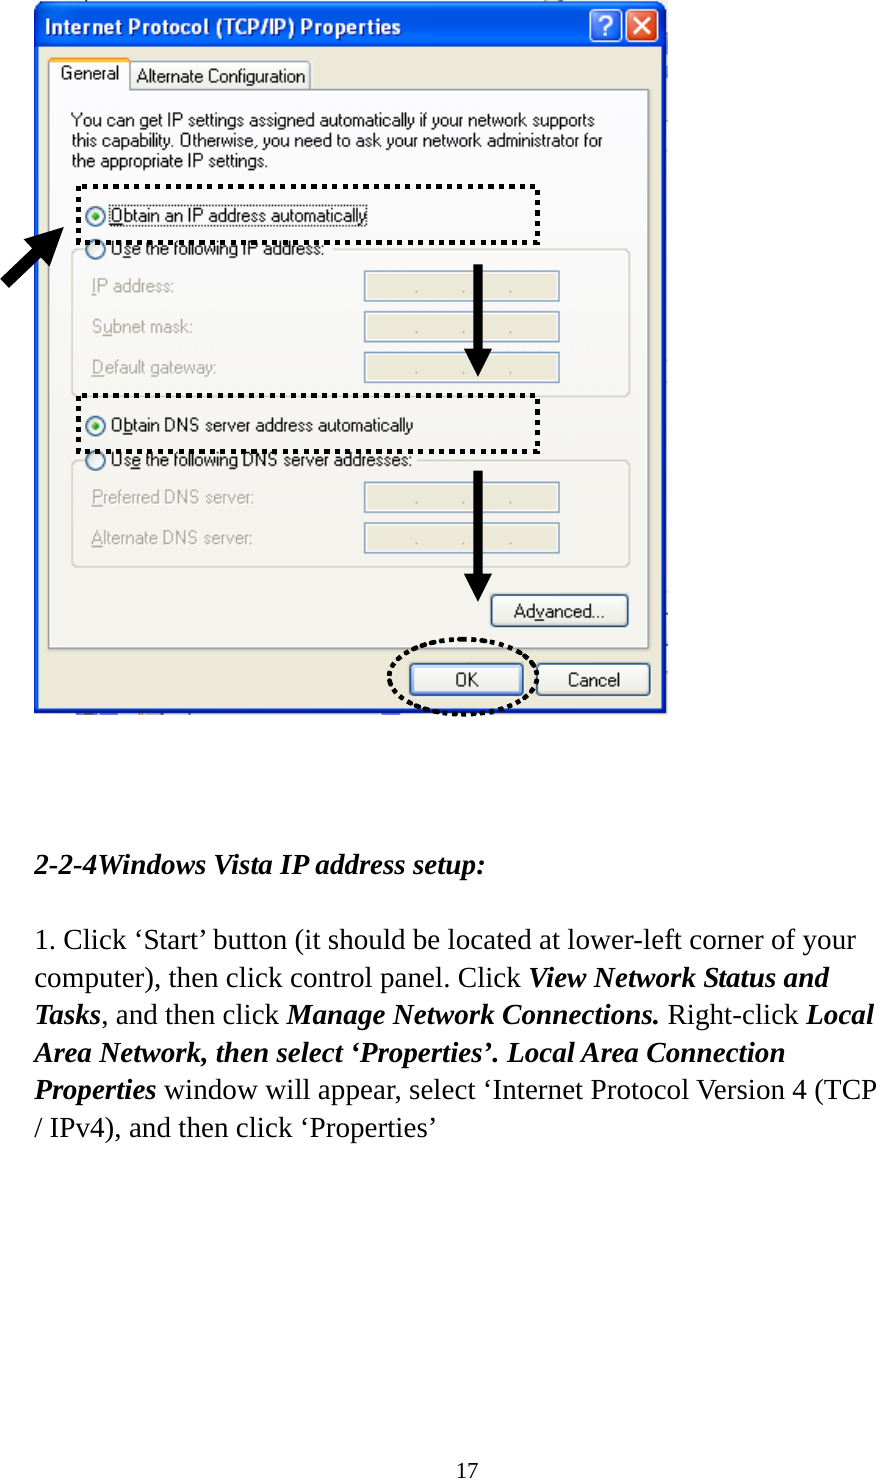 17     2-2-4Windows Vista IP address setup:  1. Click ‘Start’ button (it should be located at lower-left corner of your computer), then click control panel. Click View Network Status and Tasks, and then click Manage Network Connections. Right-click Local Area Network, then select ‘Properties’. Local Area Connection Properties window will appear, select ‘Internet Protocol Version 4 (TCP / IPv4), and then click ‘Properties’  